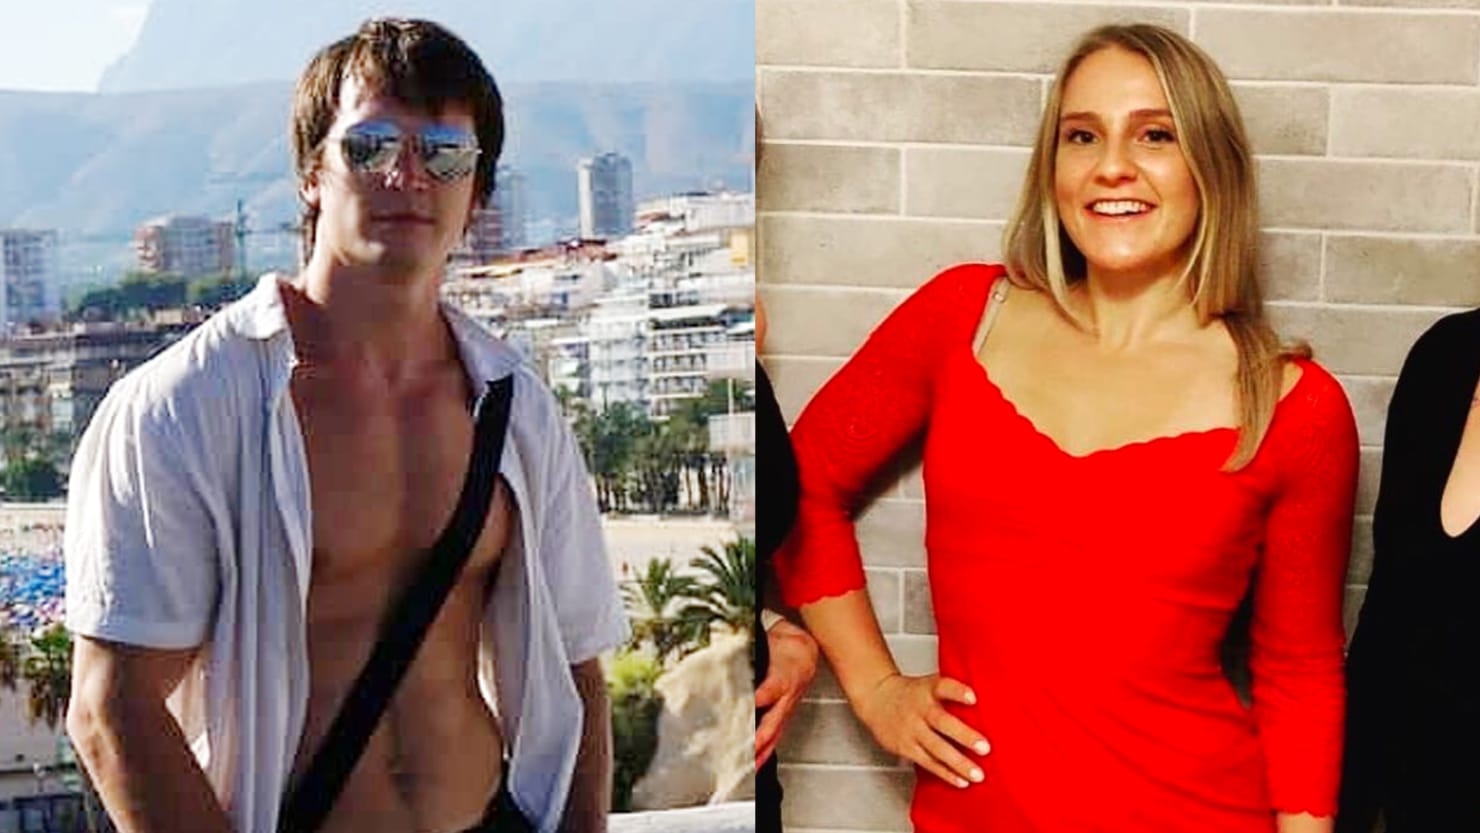 What Was The Video That Involved Emma Monkkonen & Daniil Gagarin Plunging To Their Deaths All About?